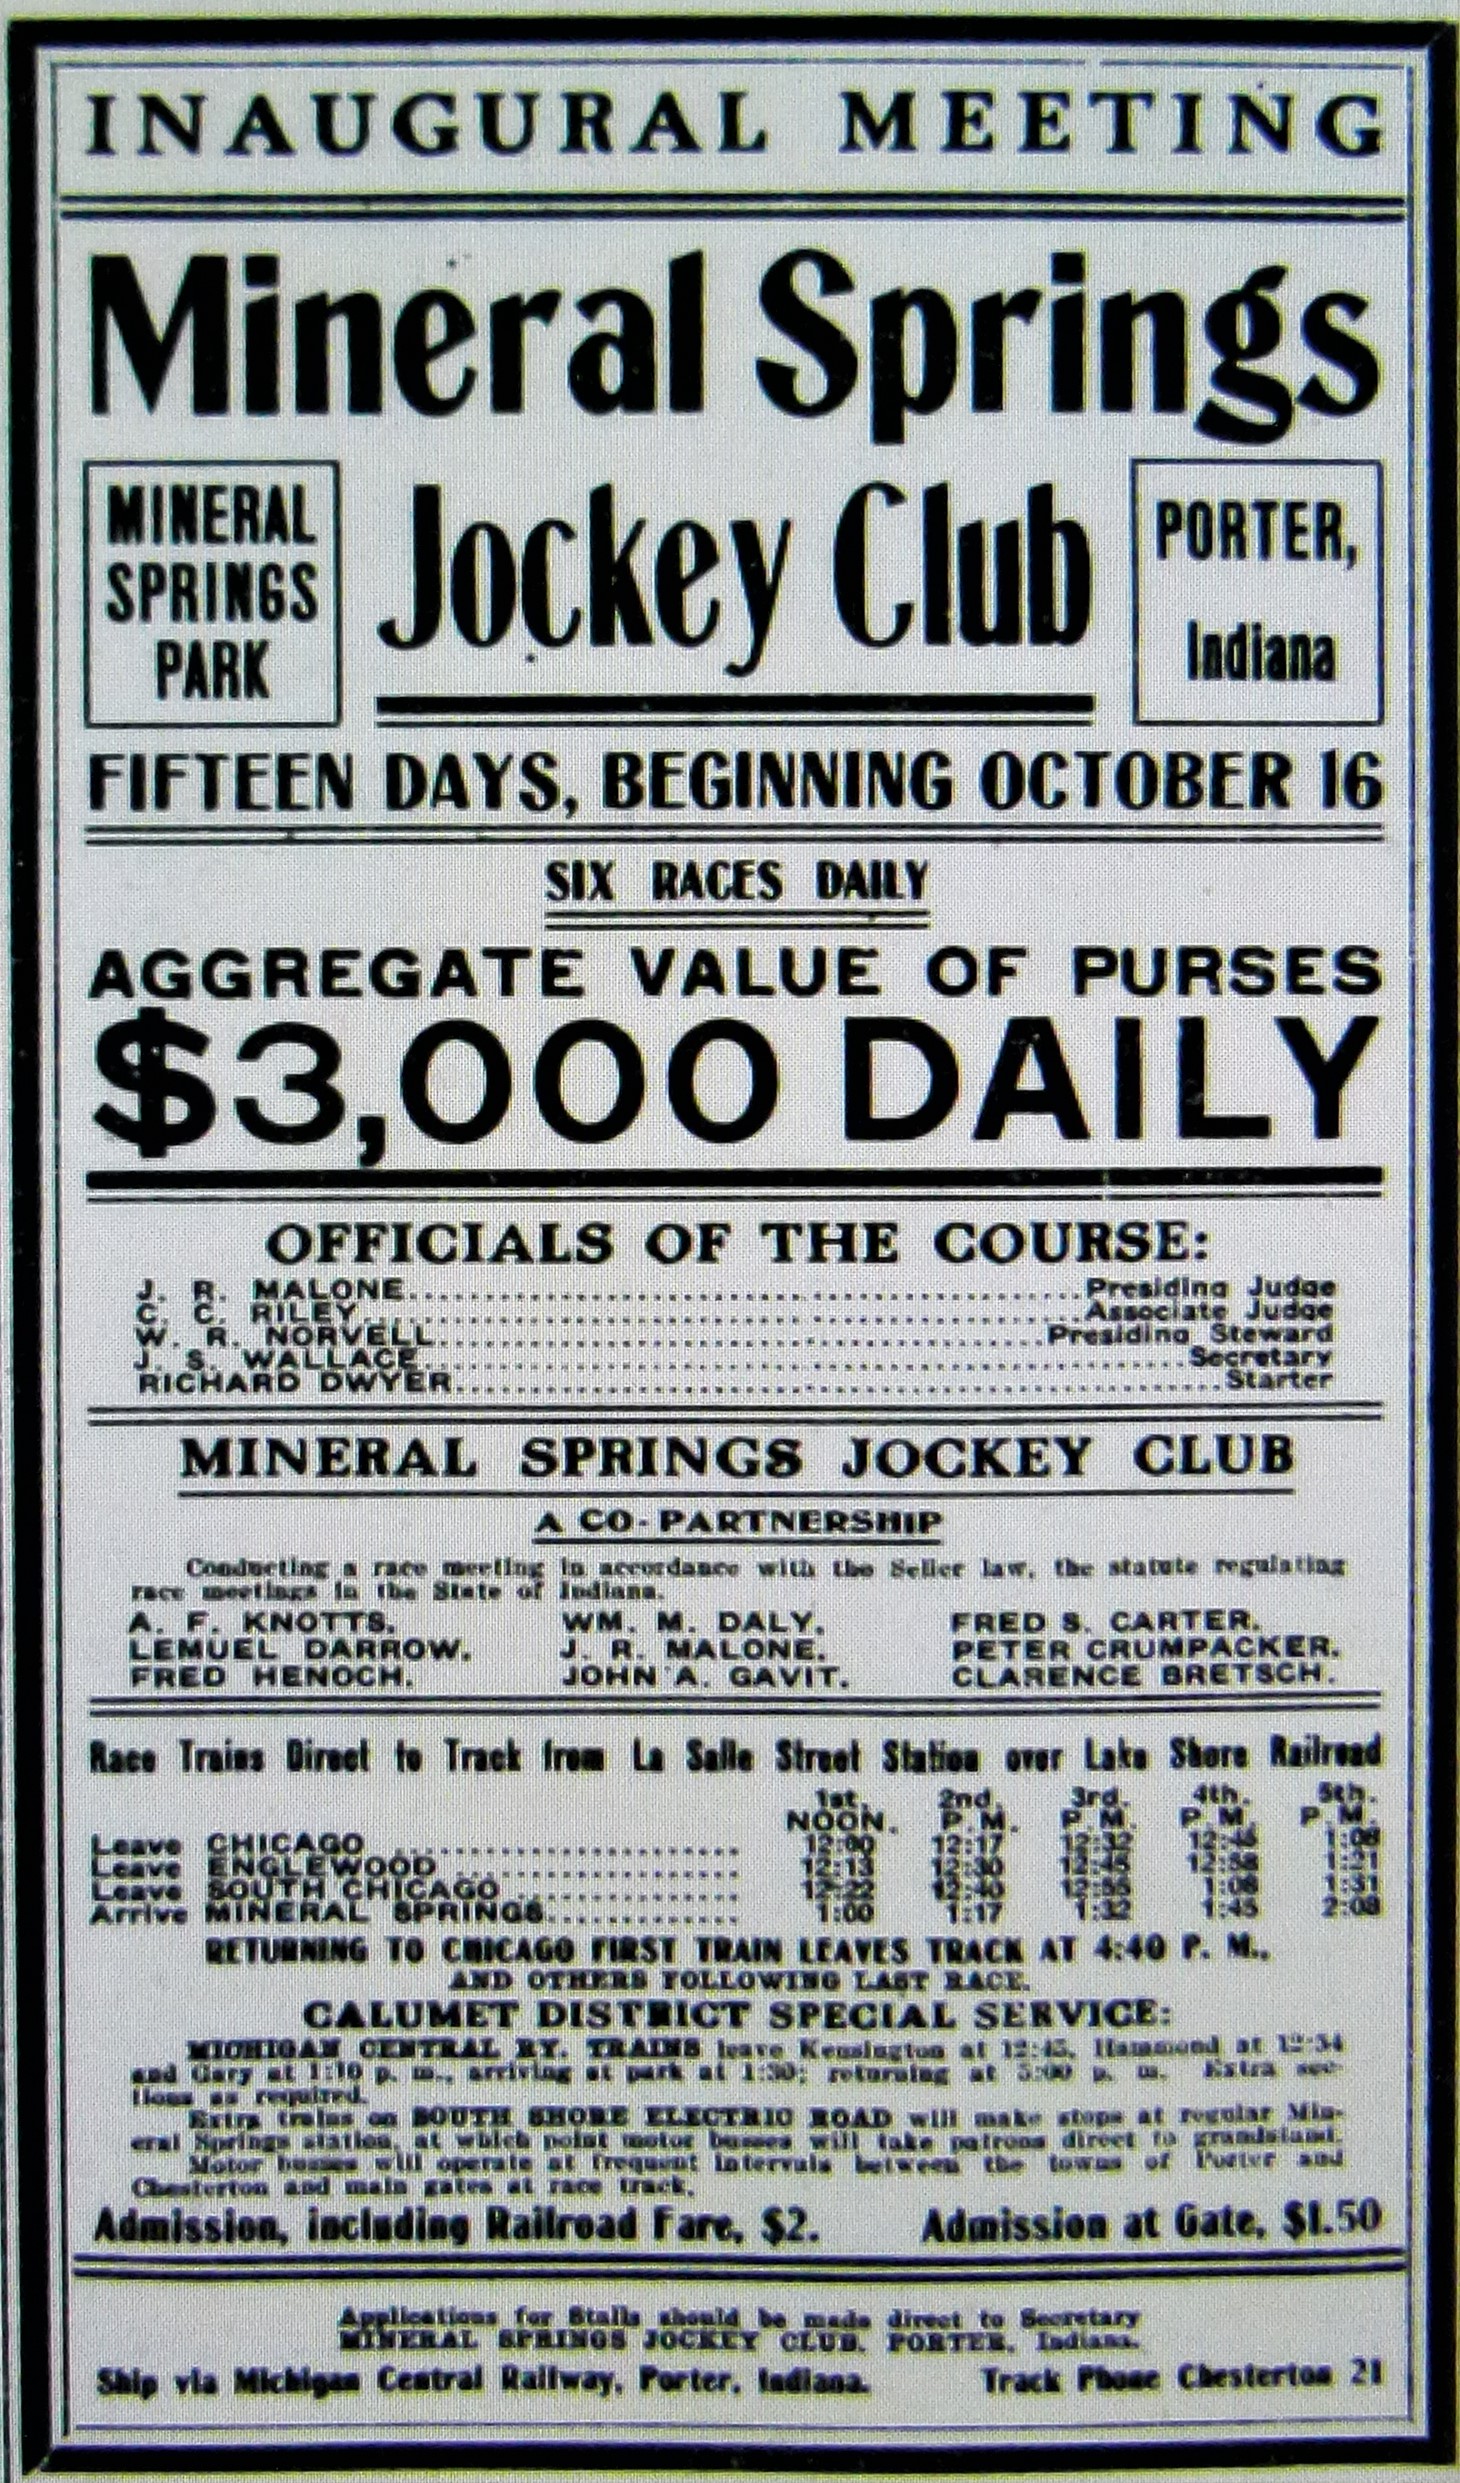 An advertisement in the Daily Racing Form for the first meeting at Mineral Springs